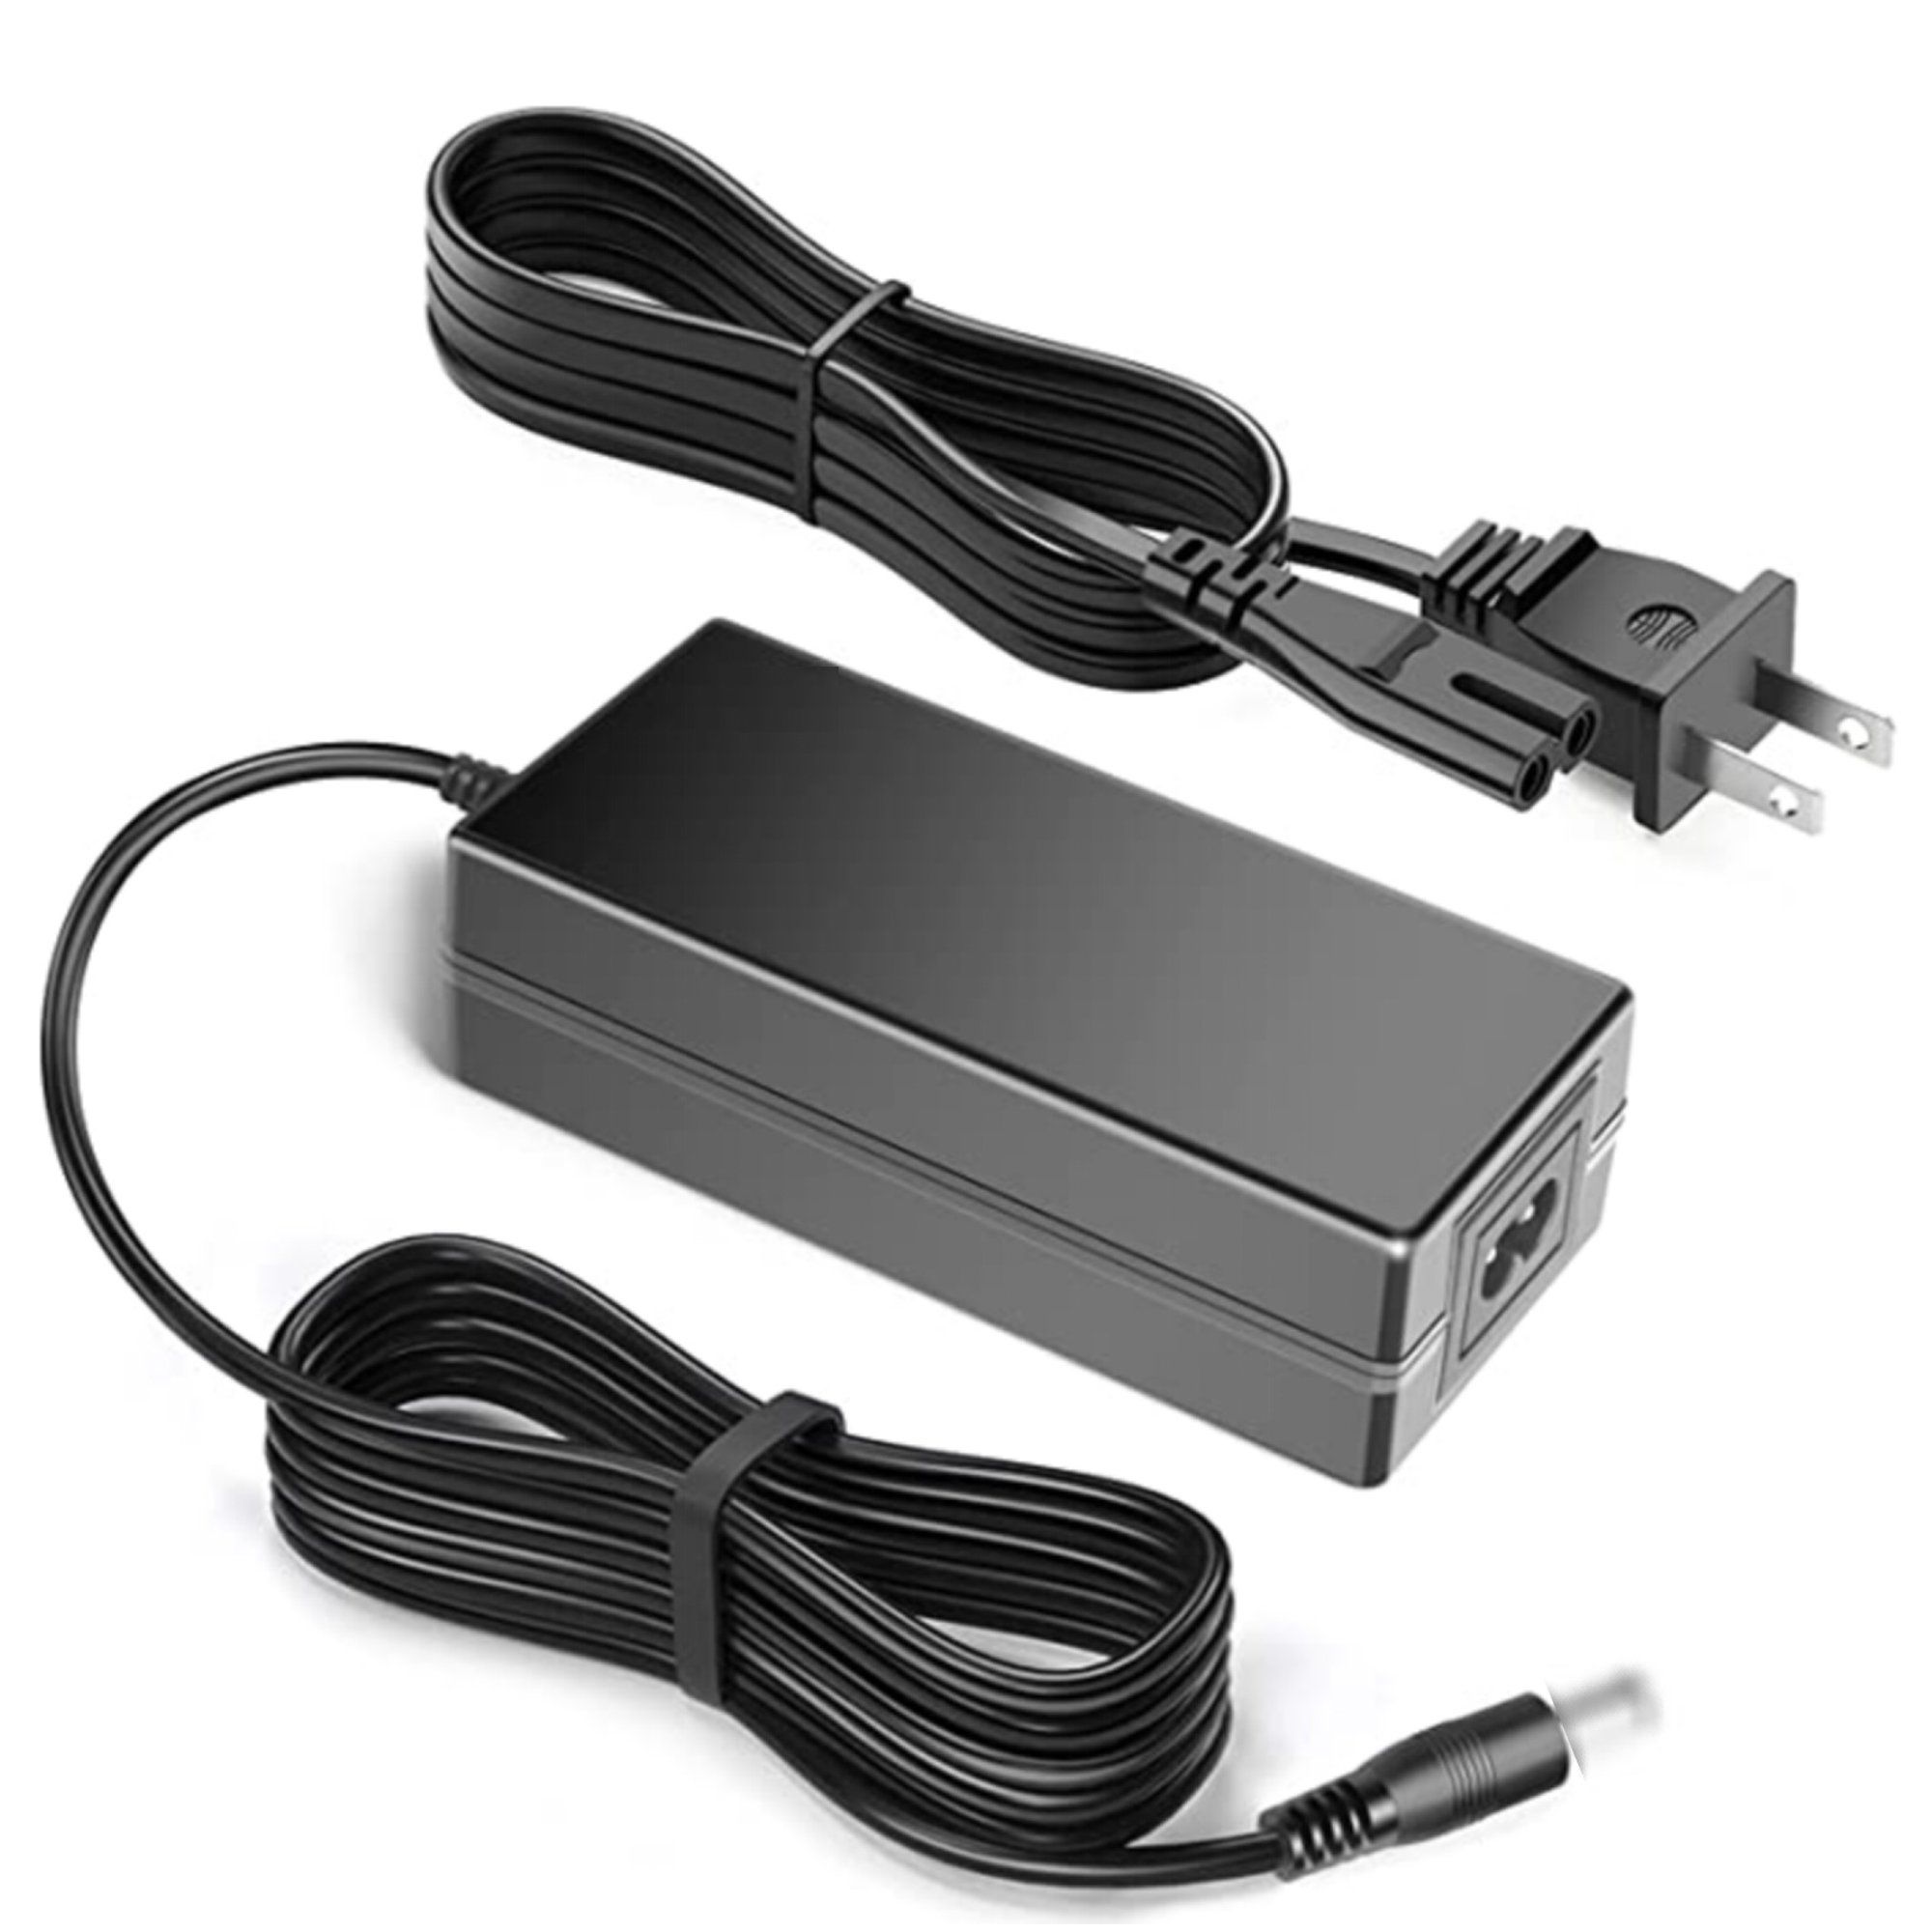 16V 2.5A AC/DC Adapter for Fujitsu SV600 FI-SV600 FI-SV600A FI-SV600A-P PA03641-B305 fi-7030 PA03750-B005 PA03750-B001 N7100 PA03706-B205 Scanner, FMC-AC313S Power Supply - image 1 of 5